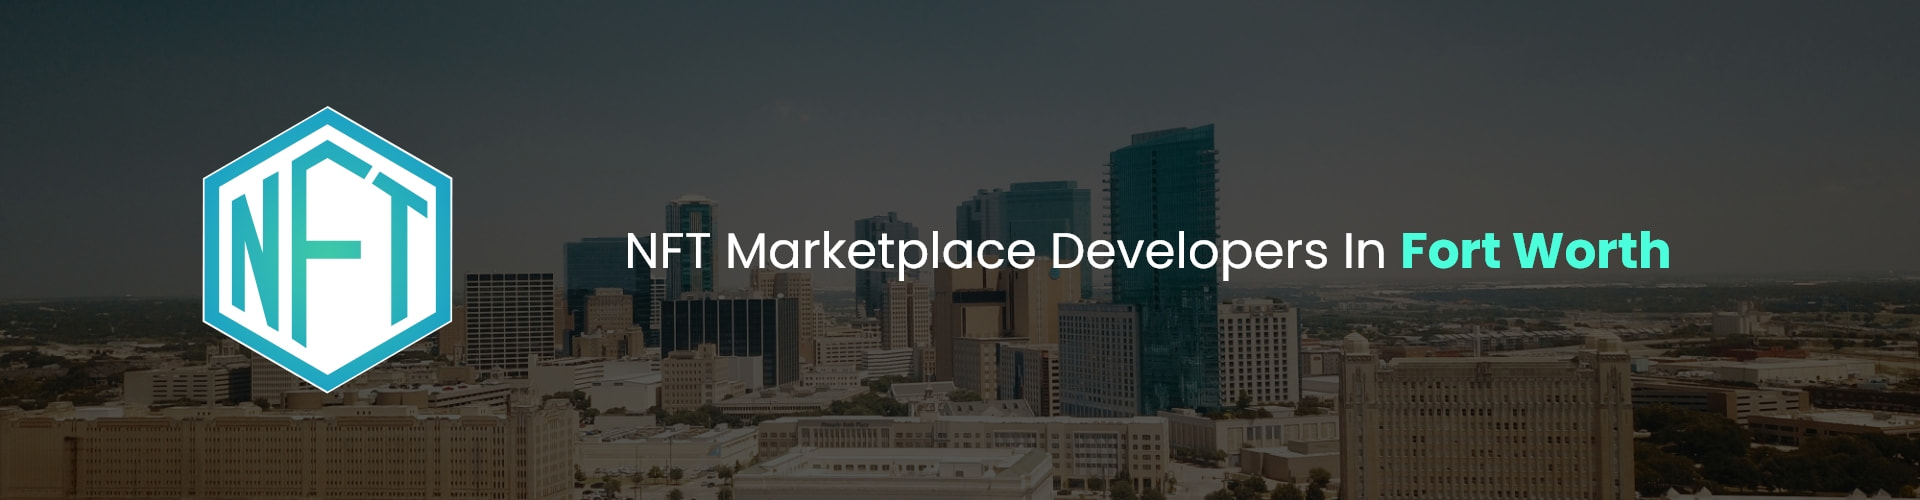 hire nft marketplace developers in fort worth